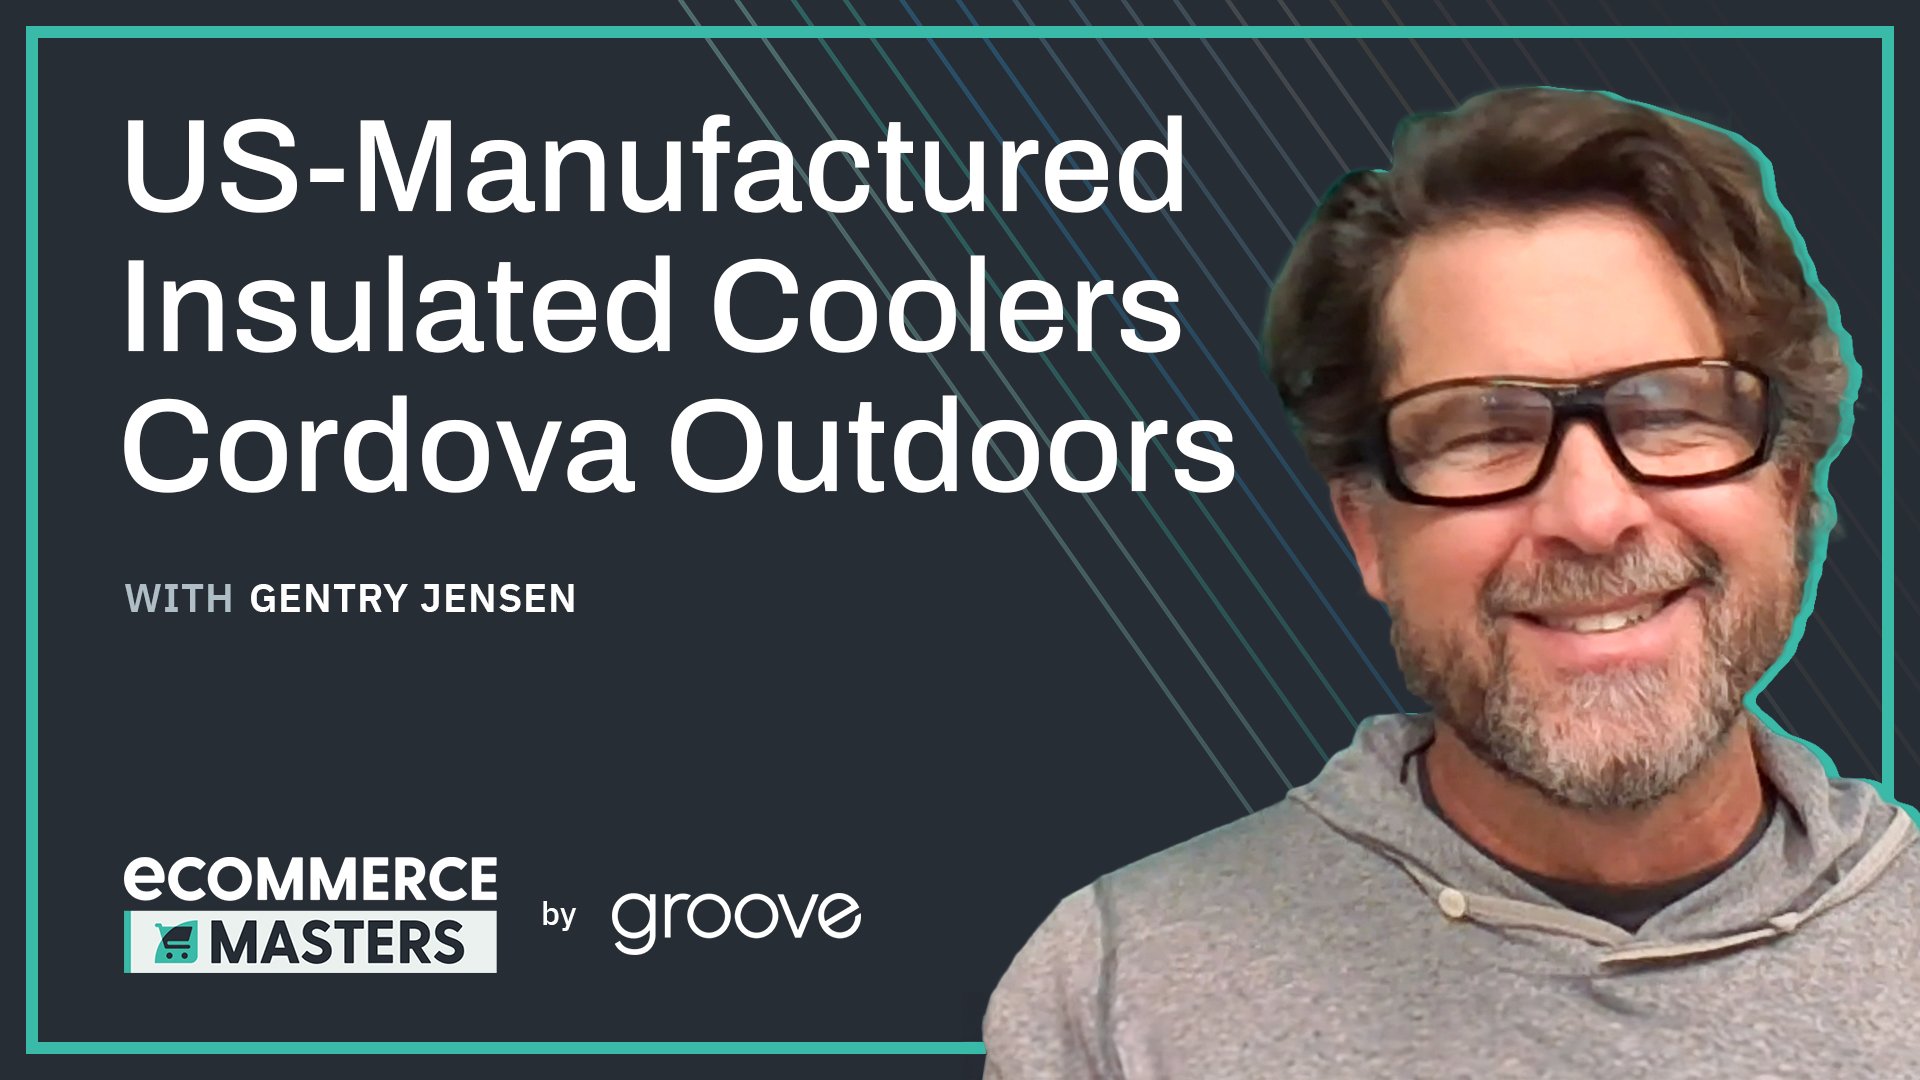 How Cordova Outdoors Manufactures Insulated Coolers In the USA with Gentry Jensen - EP 003